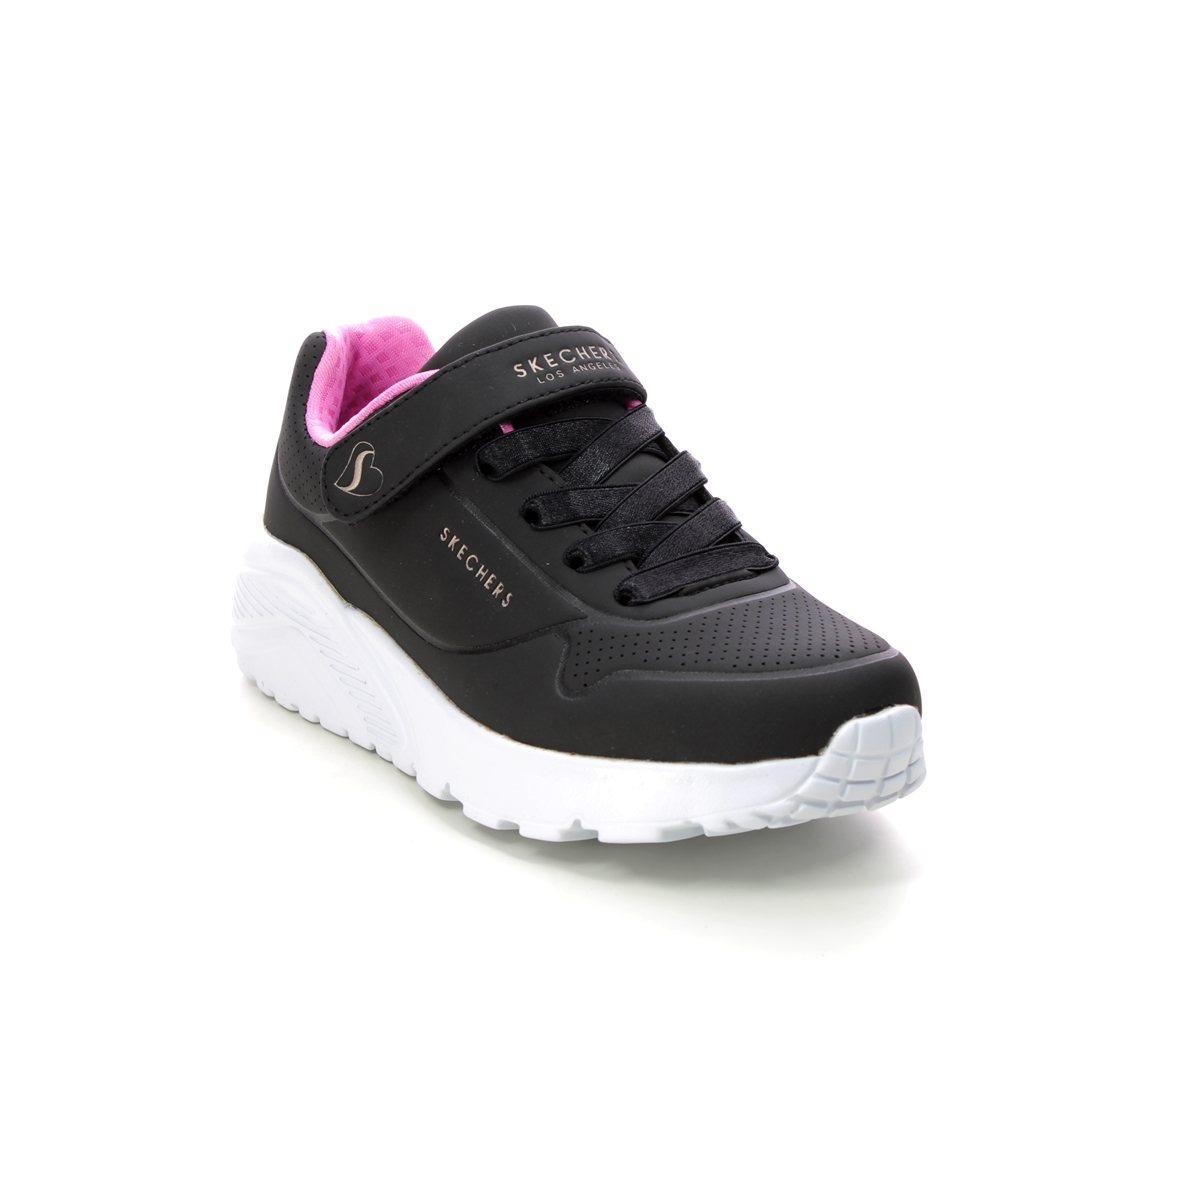 Skechers Uno Lite Bungee Black Rose Gold Kids Girls Trainers 310451L In Size 35 In Plain Black Rose Gold For kids